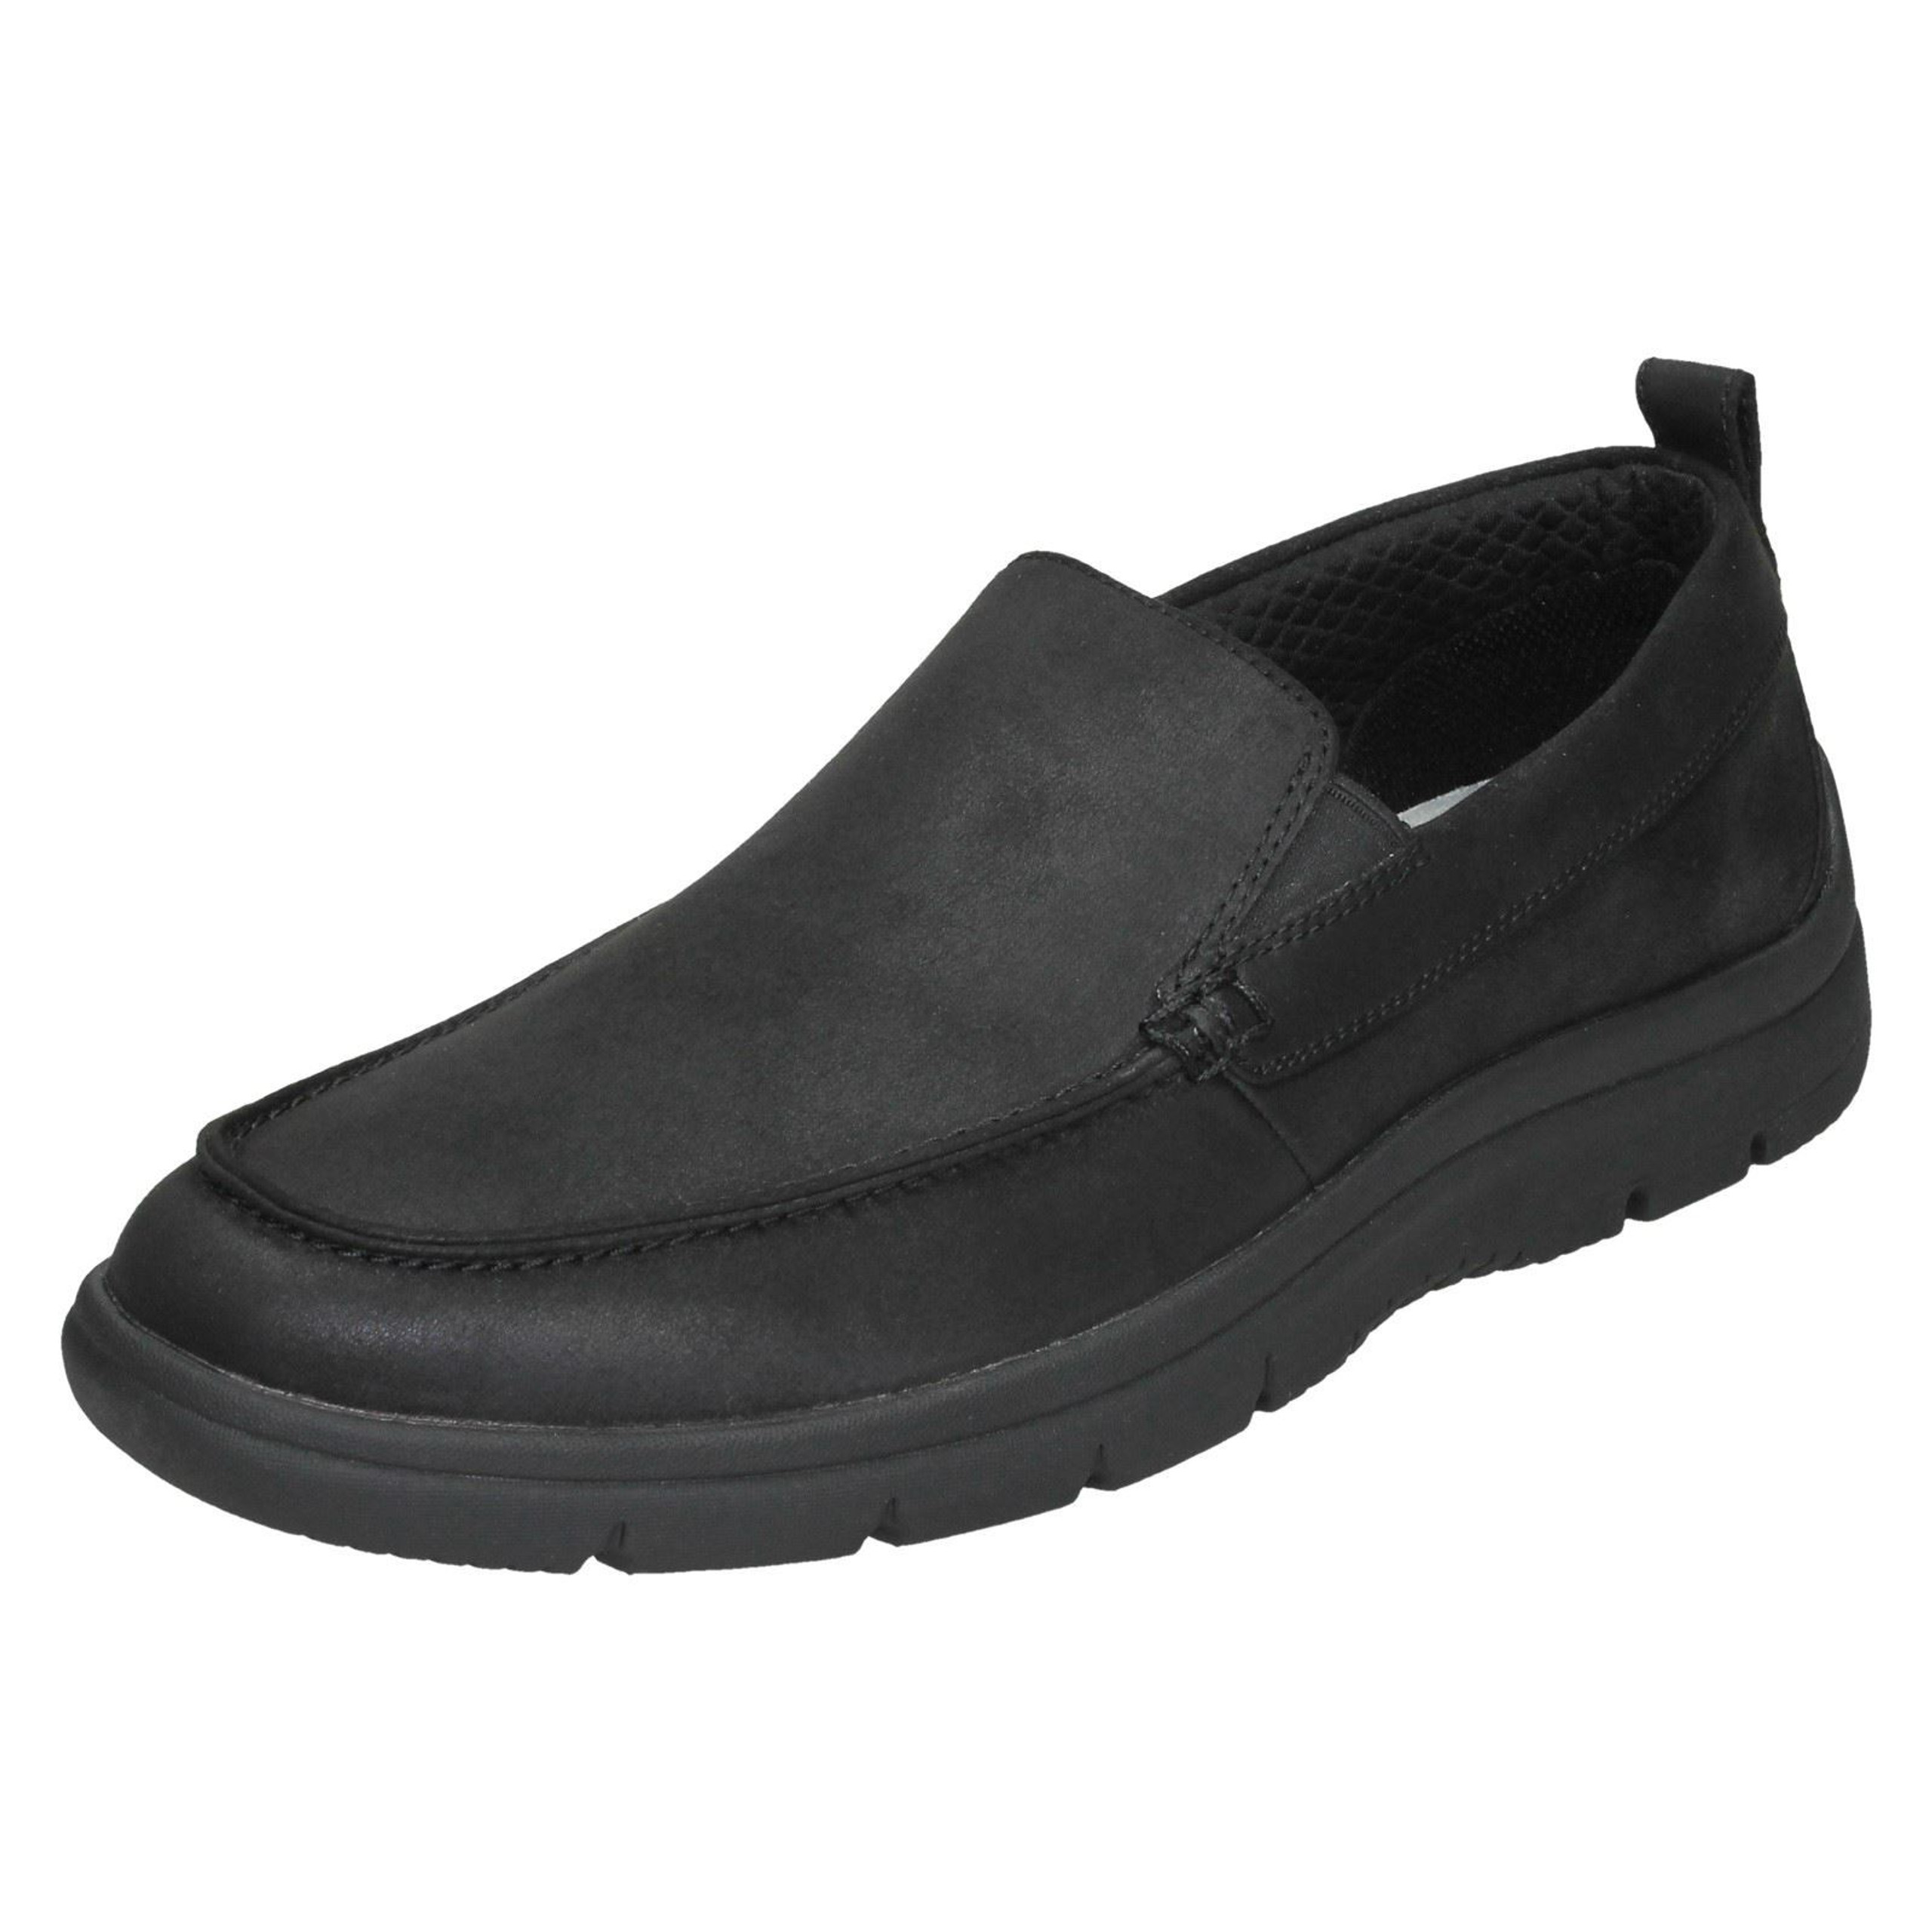 Mens Cloudsteppers By Clarks Slip On Shoes Tunsil Way